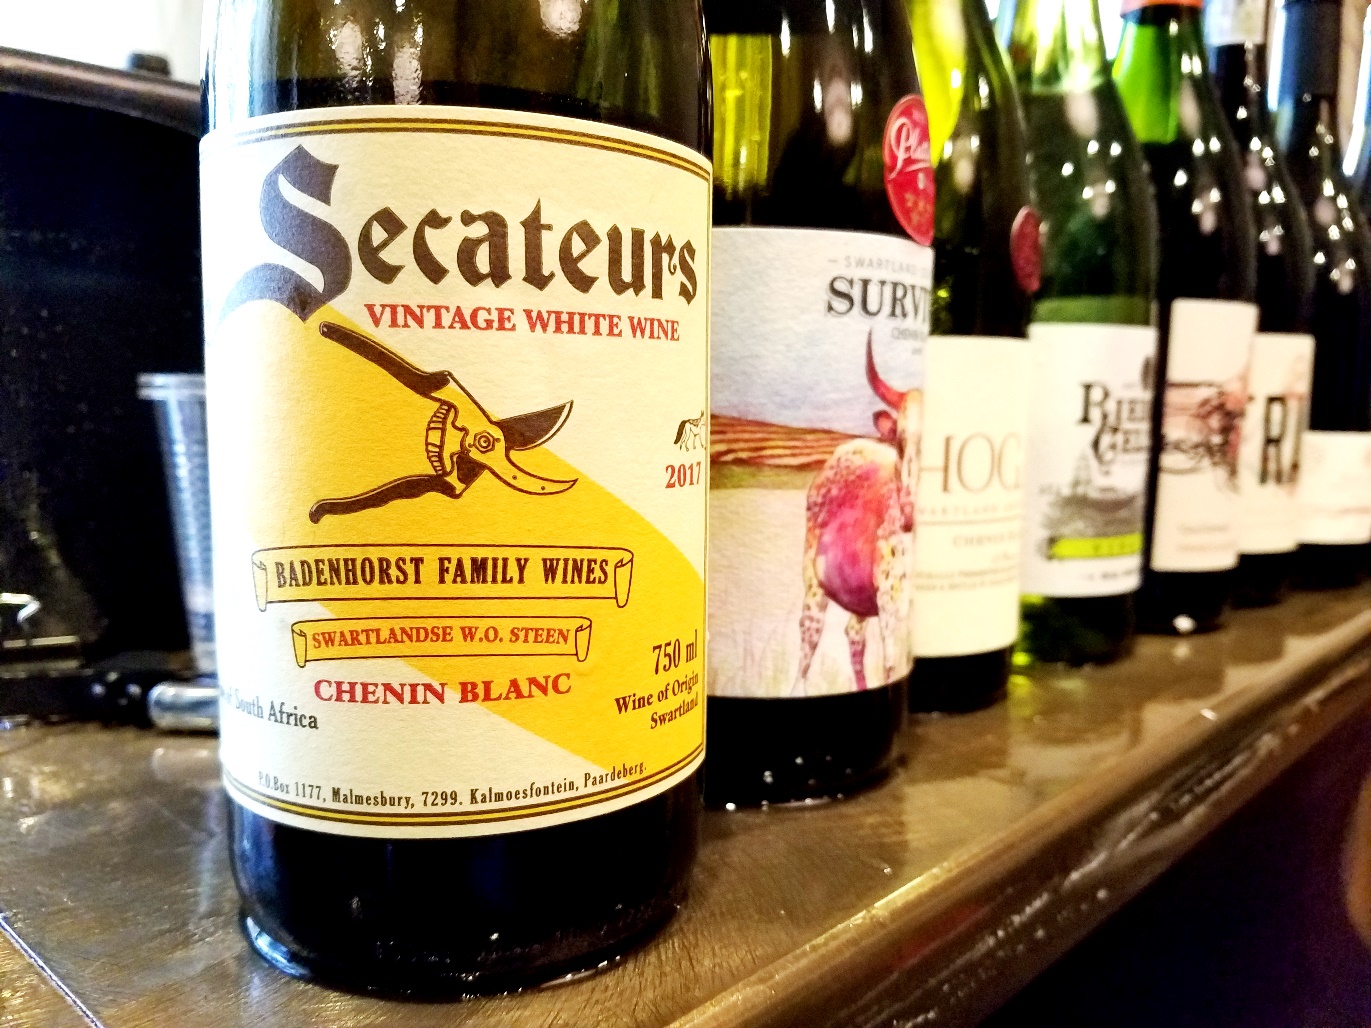 A.A. Badenhorst Family Wines, Secateurs, Chenin Blanc 2017, Swartland, South Africa, Wine Casual